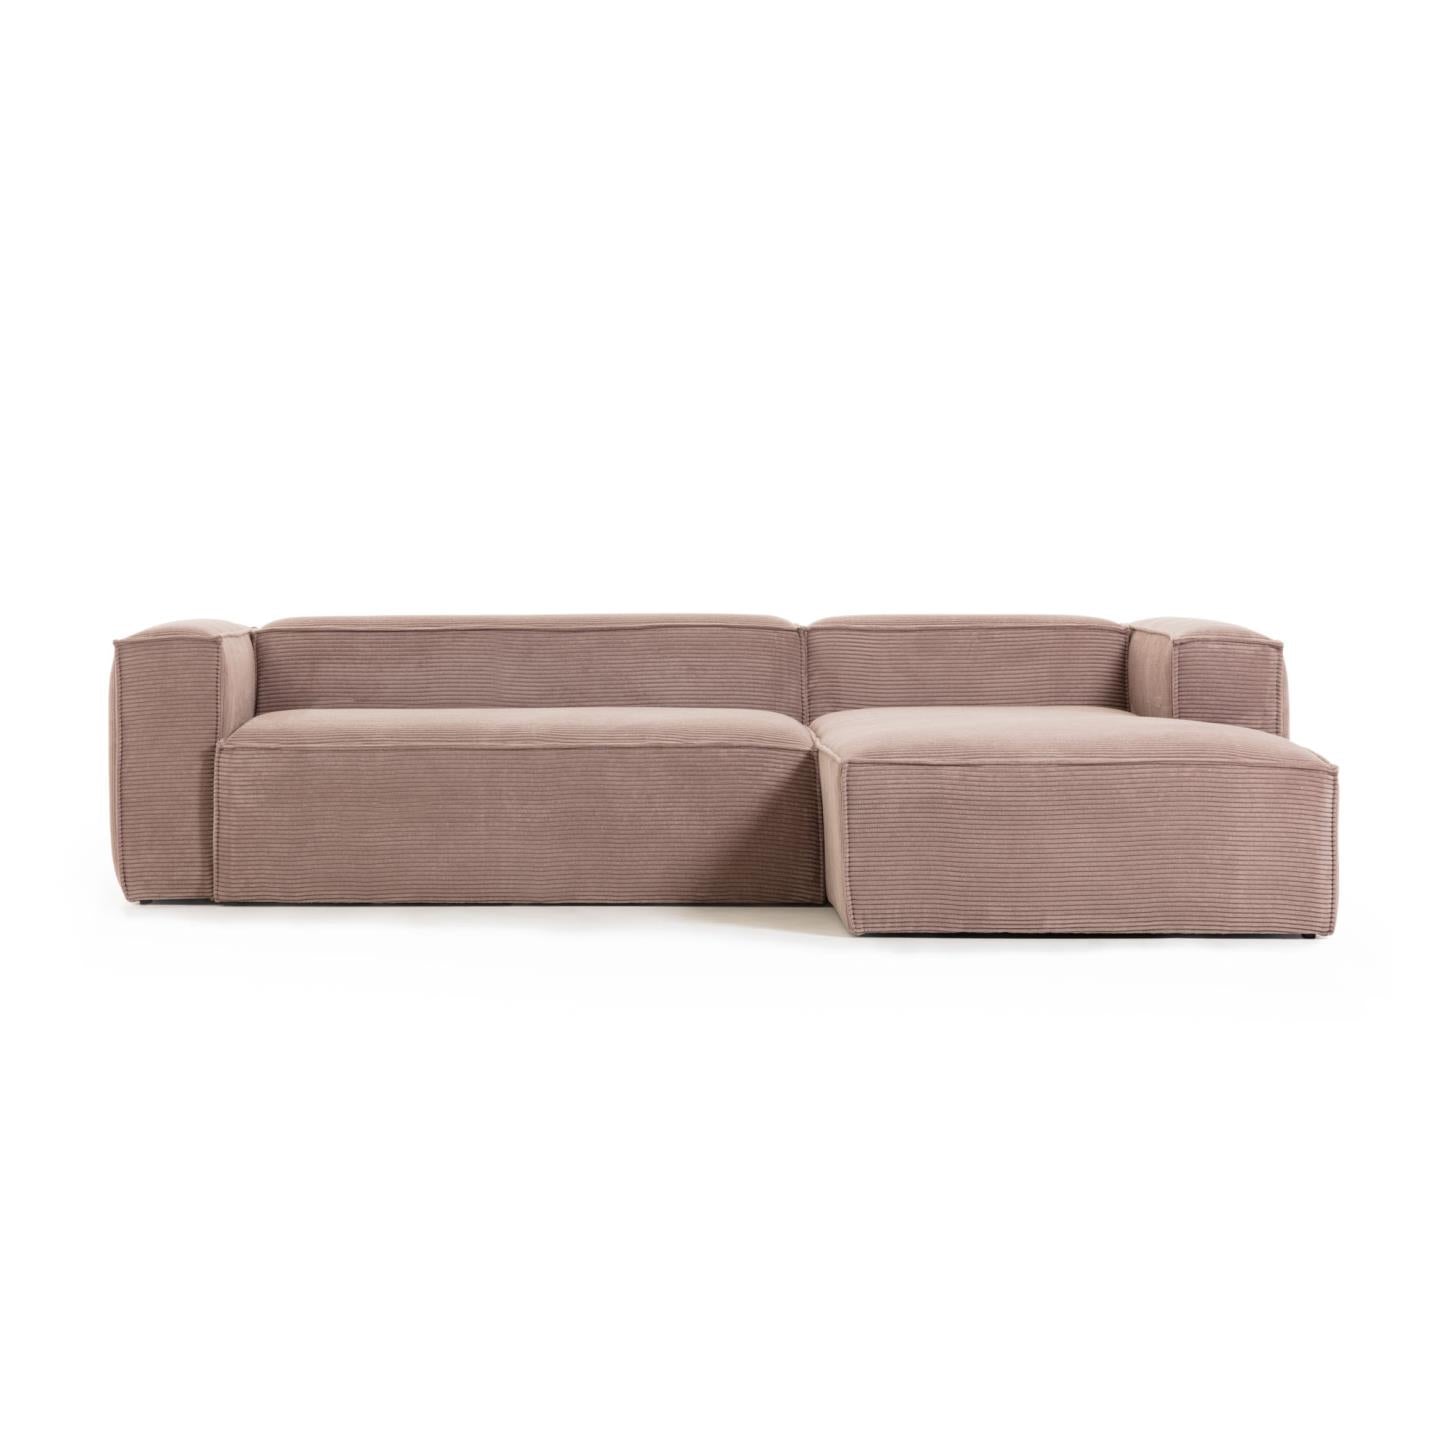 Blok 3 seater sofa with right side chaise longue in pink wide seam corduroy, 300 cm